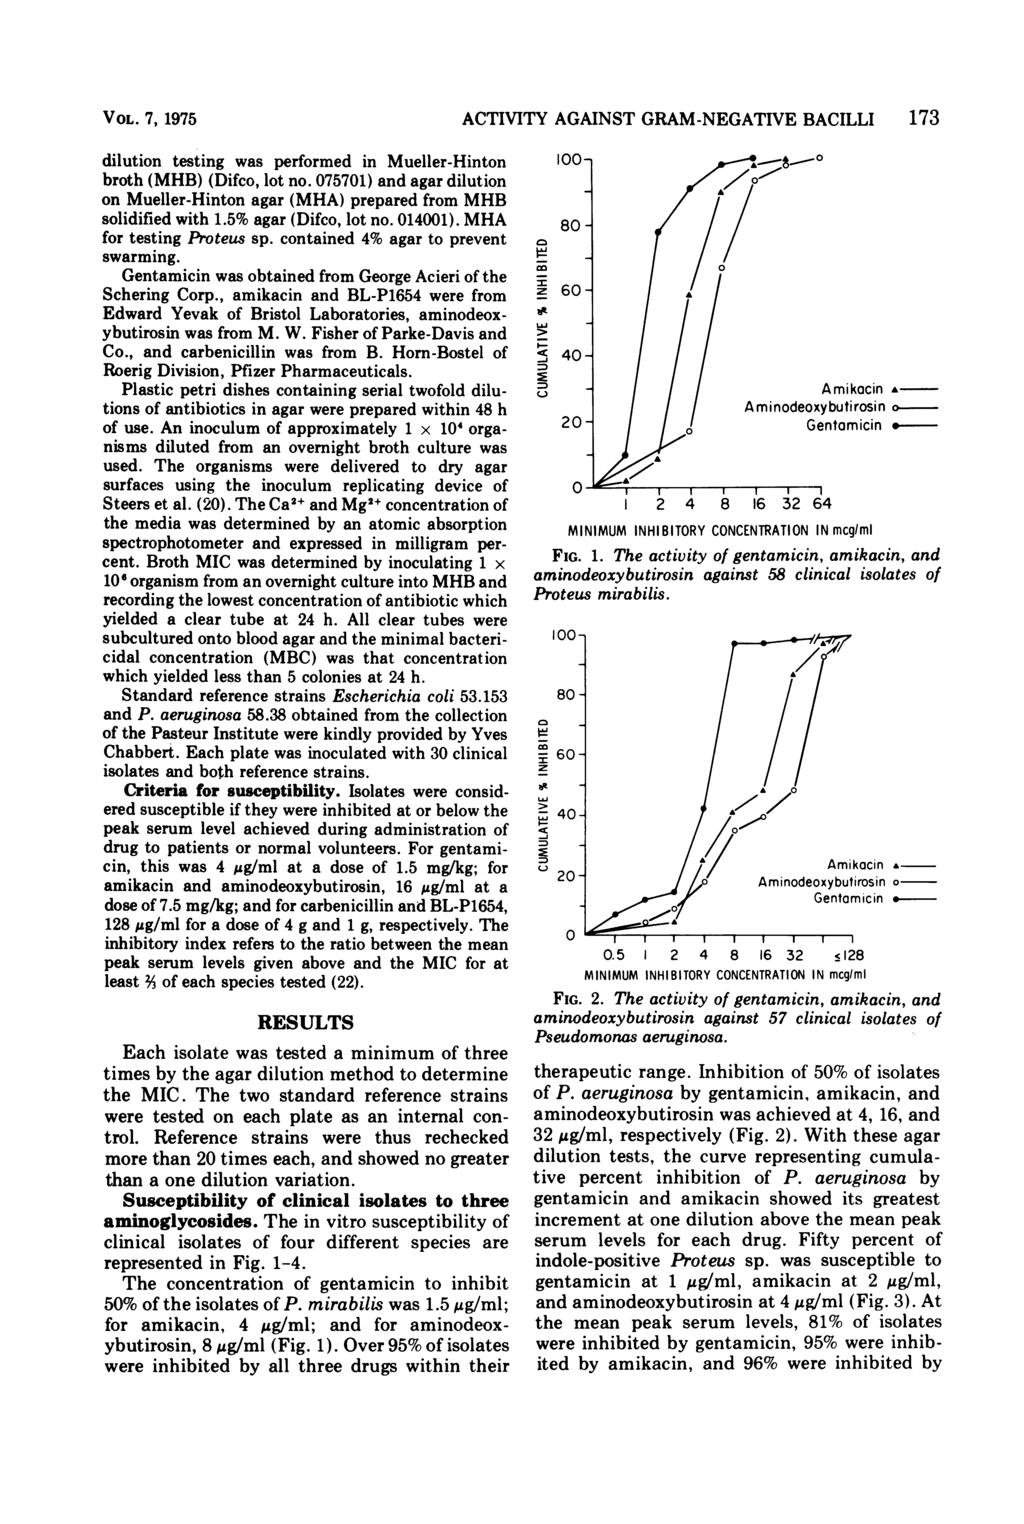 VOL. 7, 1975 dilution testing was performed in Mueller-Hinton broth (MHB) (Difco, lot no. 075701) and agar dilution on Mueller-Hinton agar (MHA) prepared from MHB solidified with 1.